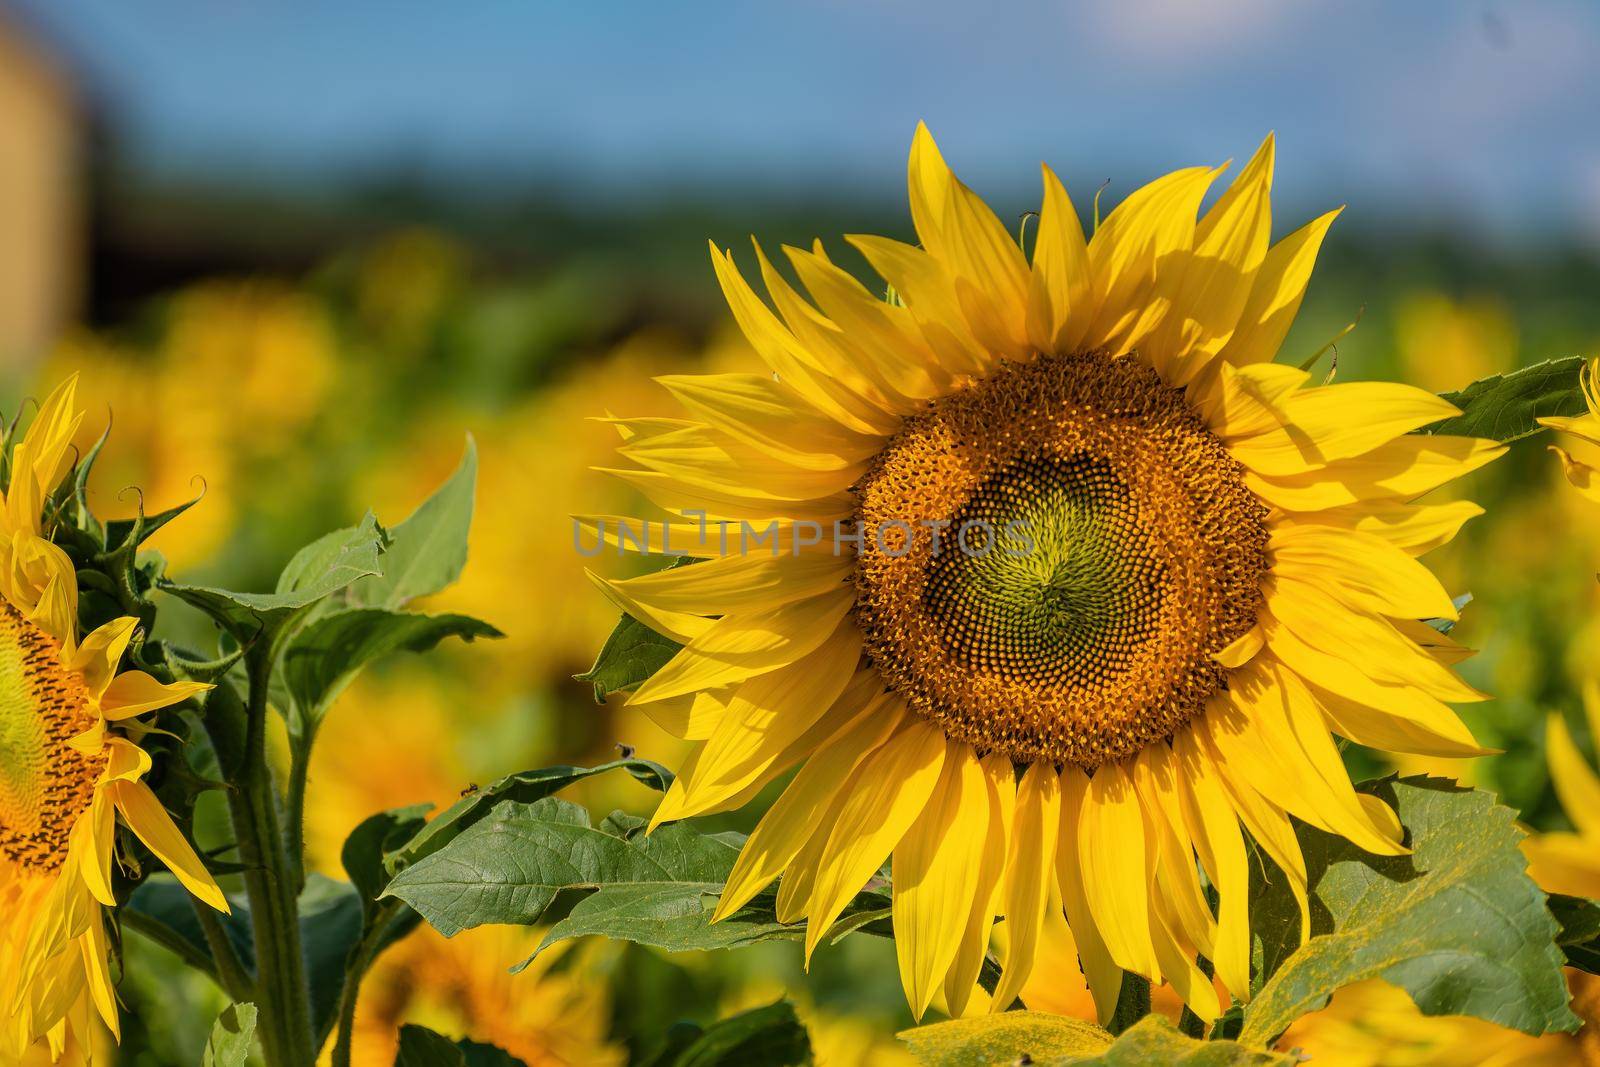 Flower of blooming sunflower, against the background of a moderate sky by rostik924